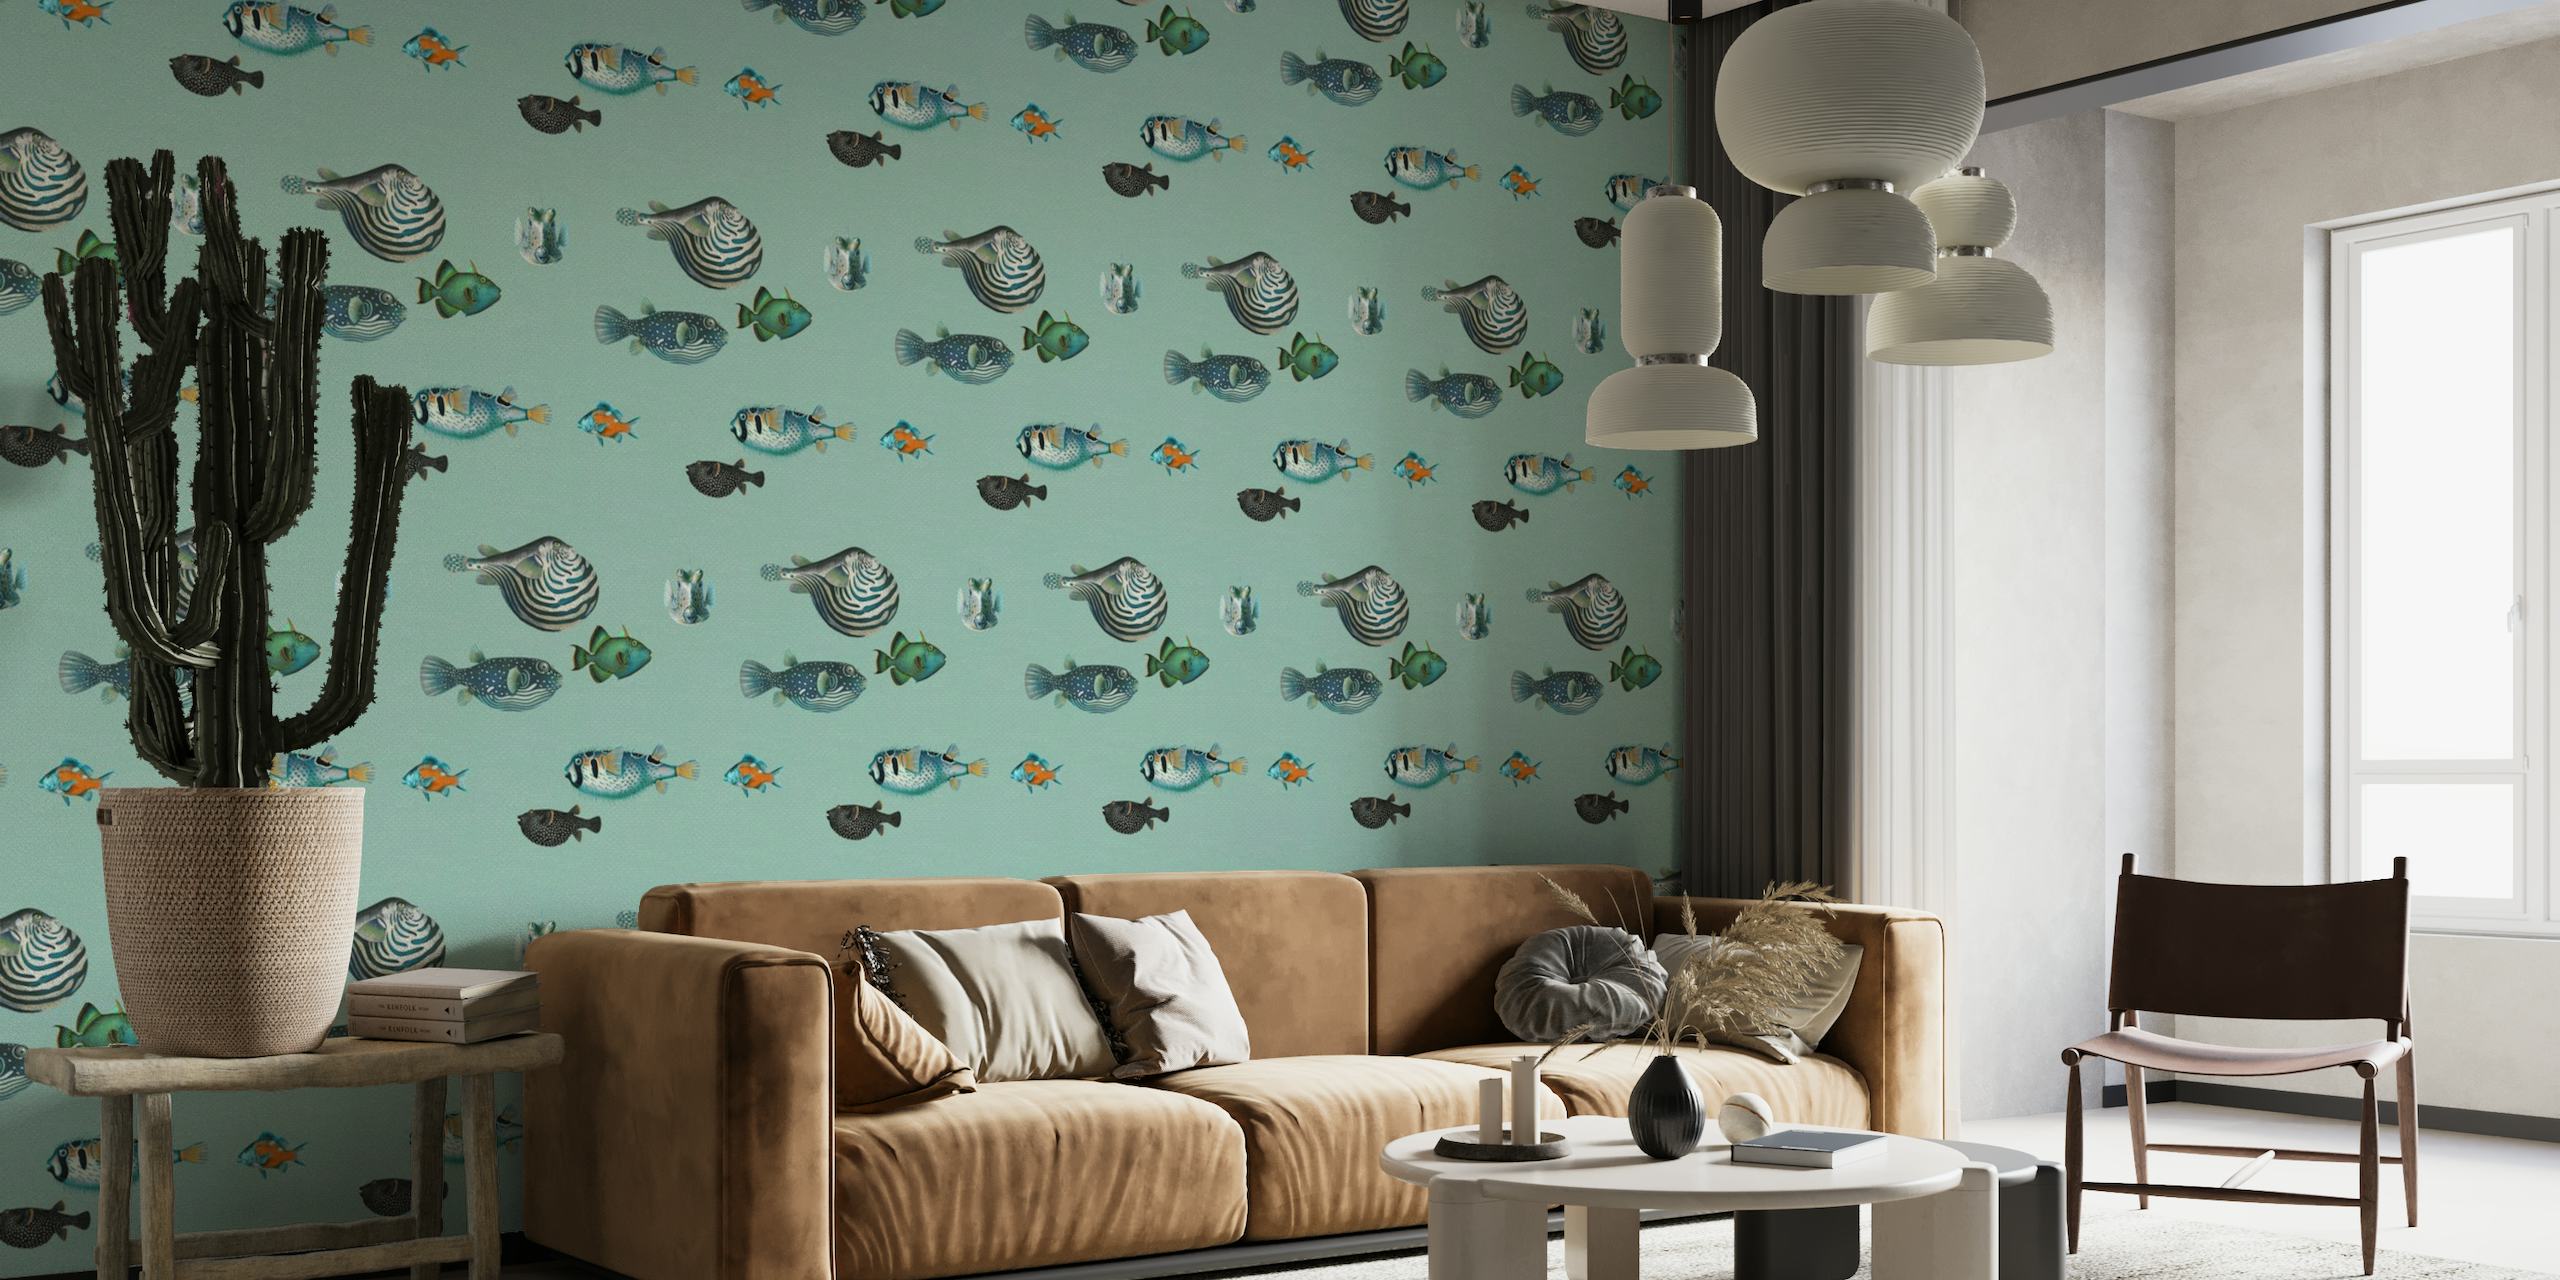 Acquario Fish Pattern wall mural with various fish illustrations on duck egg blue background